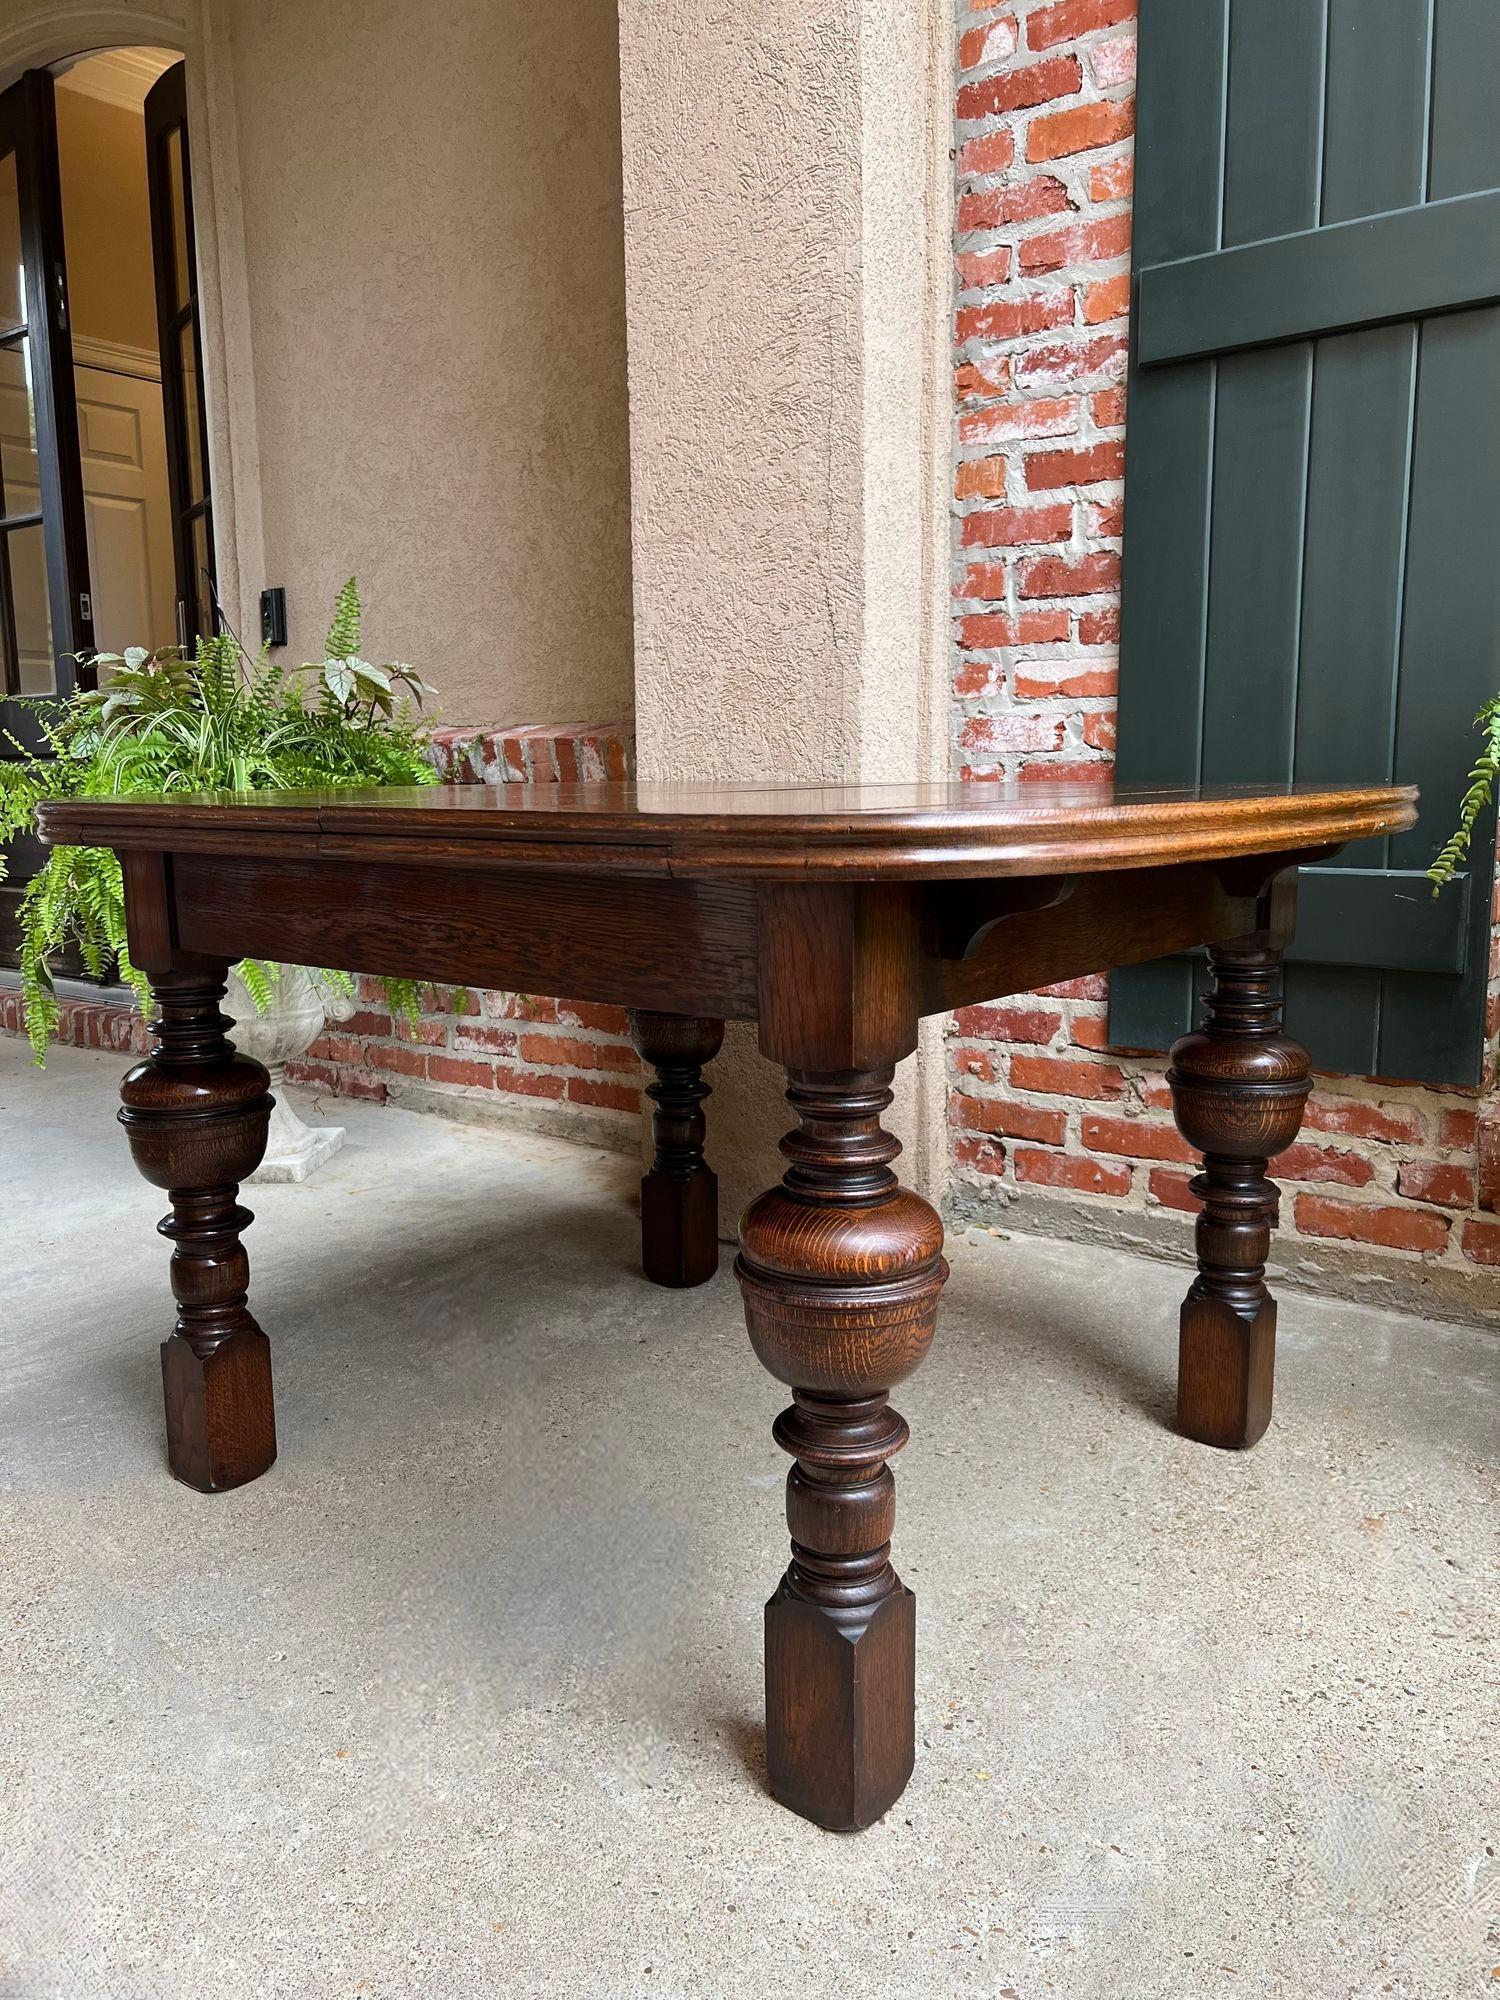 Antique English Dining Table Draw Leaf Tudor Carved Tiger Oak Large Game Kitchen.

Direct from England, a beautiful antique draw leaf table that expands to over 6 ft. with leaves extended!  The large, rounded tabletop features outstanding tiger oak